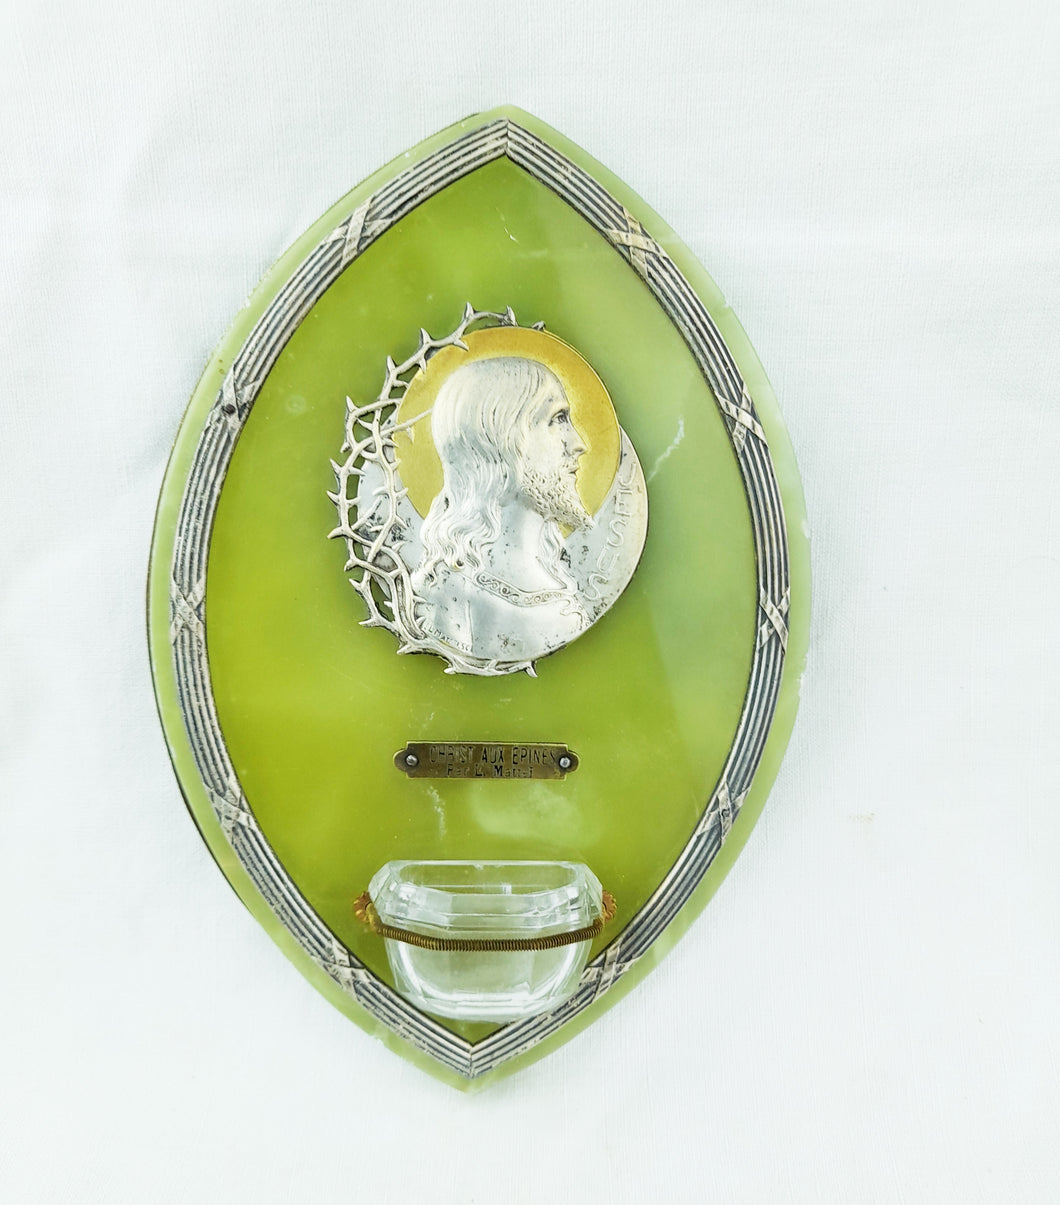 SOLD Stunning Holy Water Font, Silver With Gold Wash Plaque, Silver Surround Set Onto Green Onyx By Louis Octave Mattei, Crystal Font c 1895